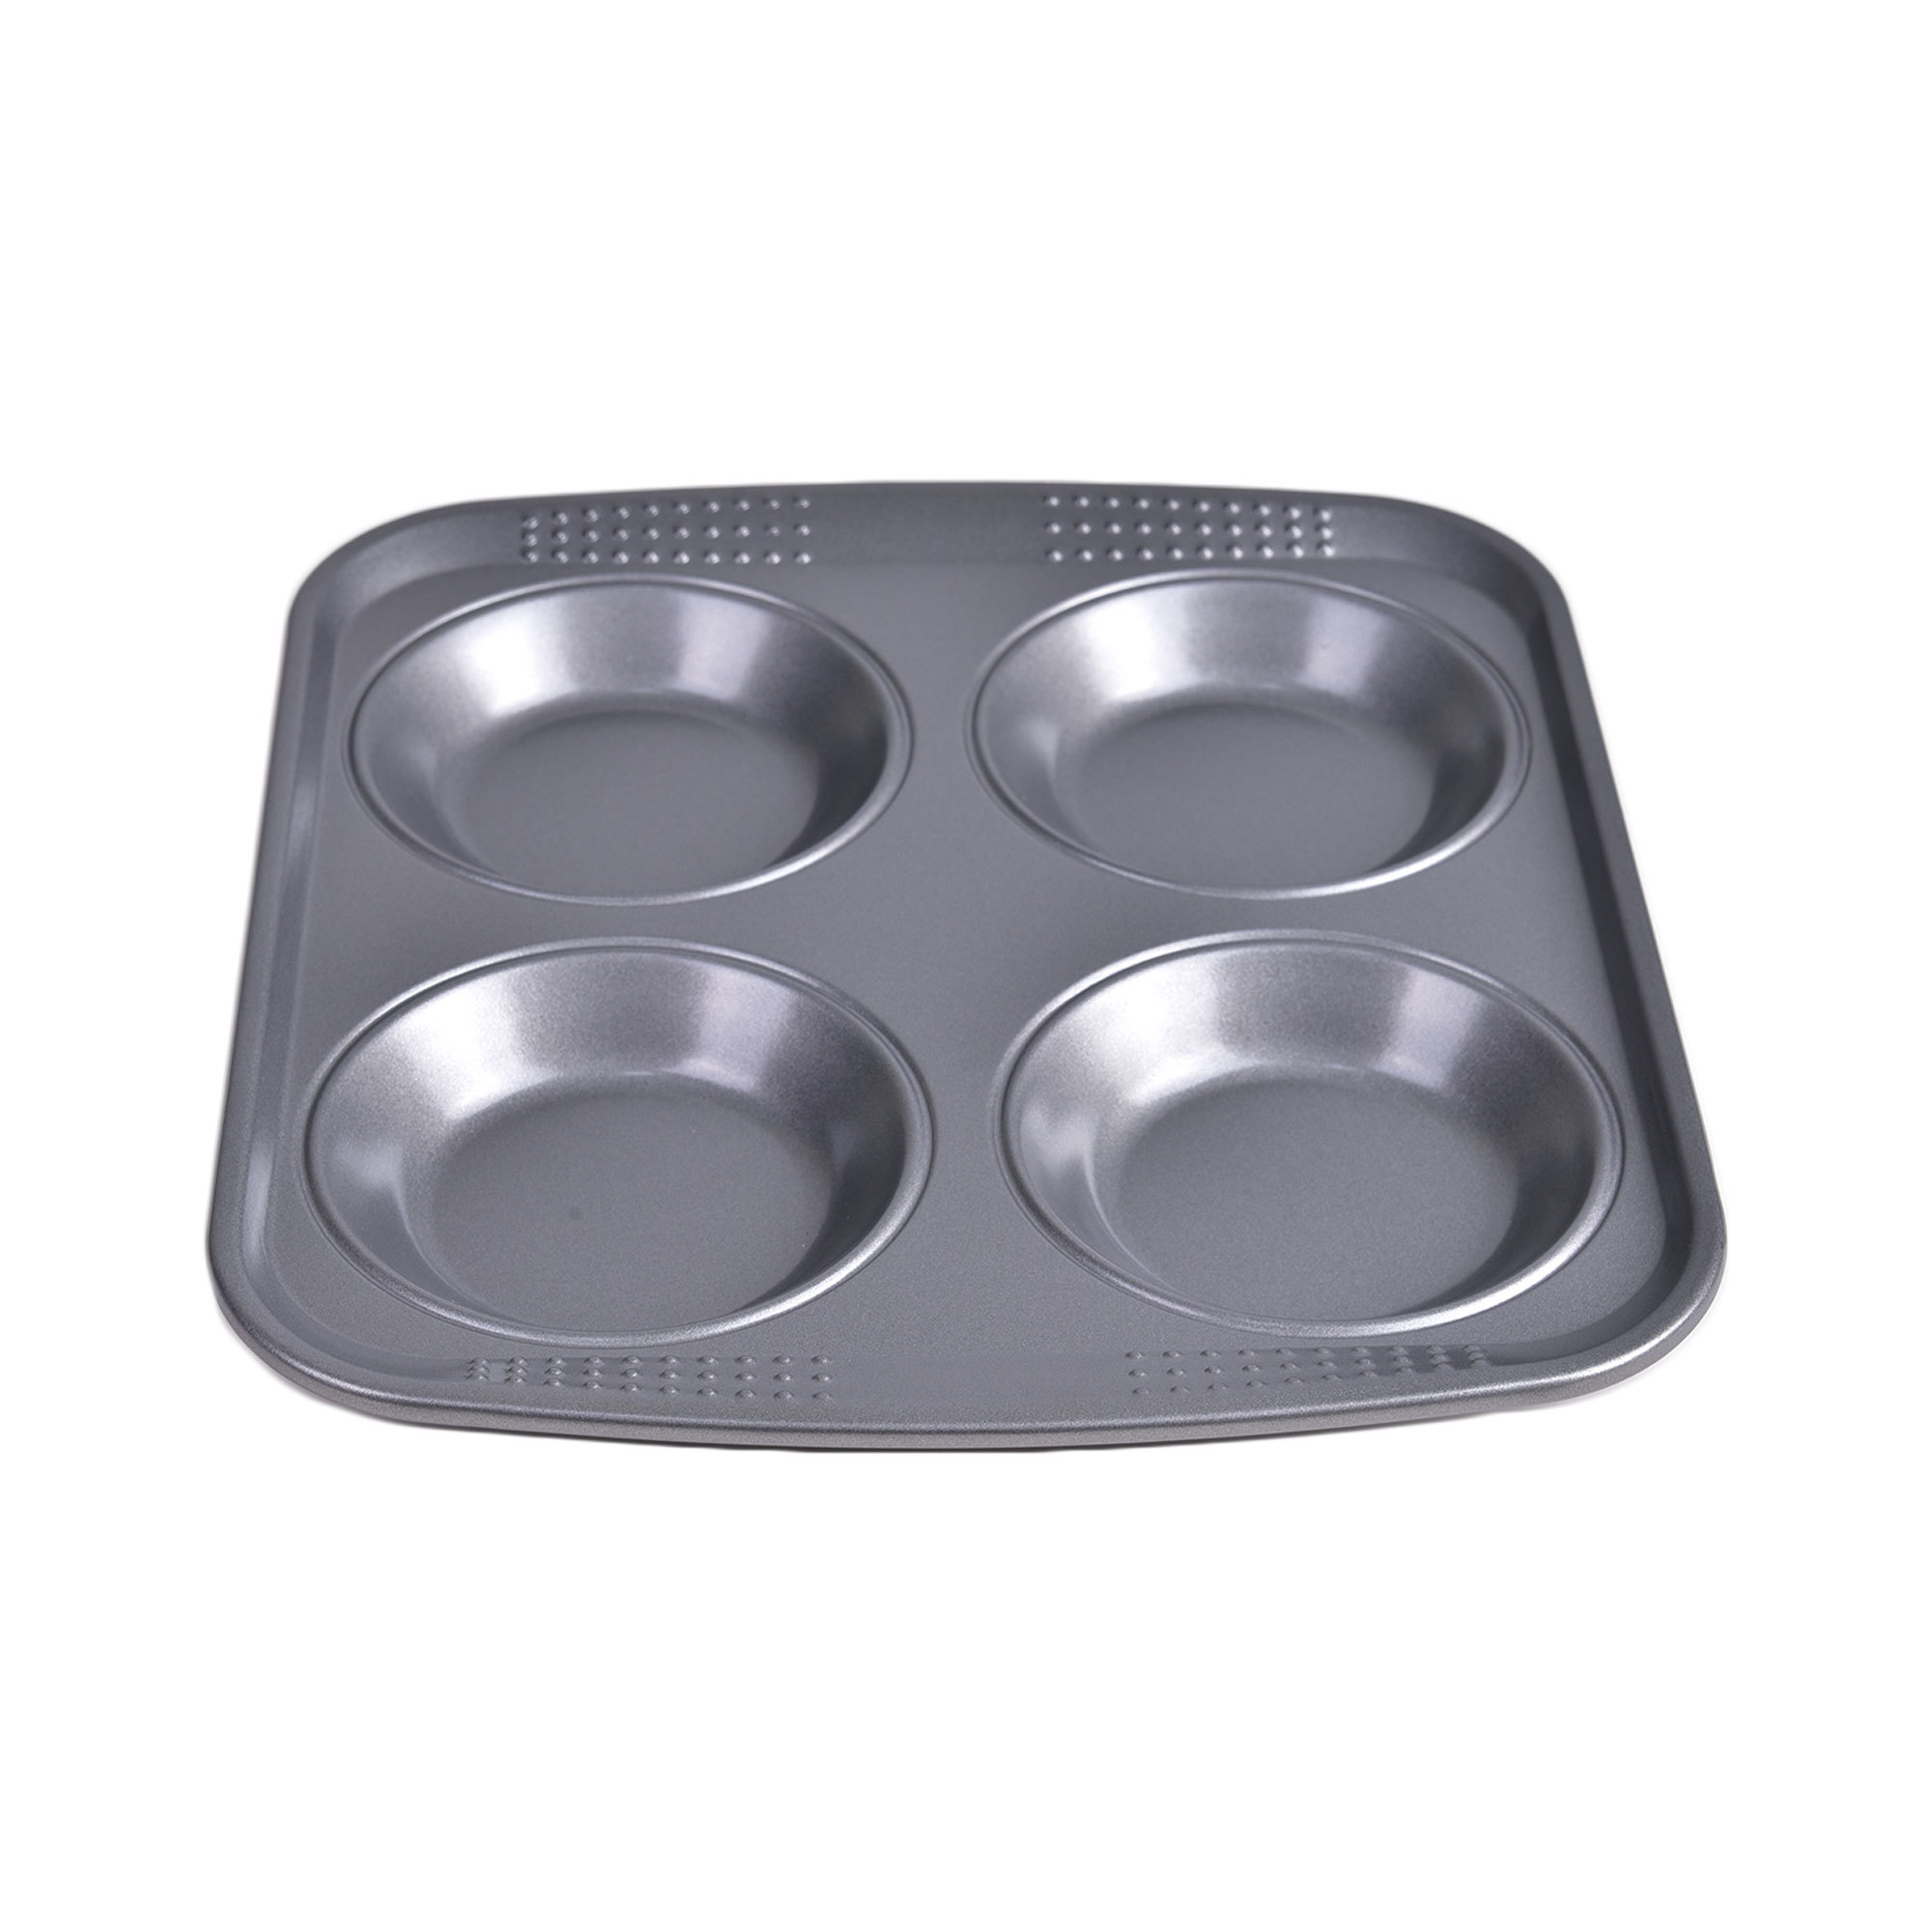 4Cup Yorkshire Pudding Pan 3235-6